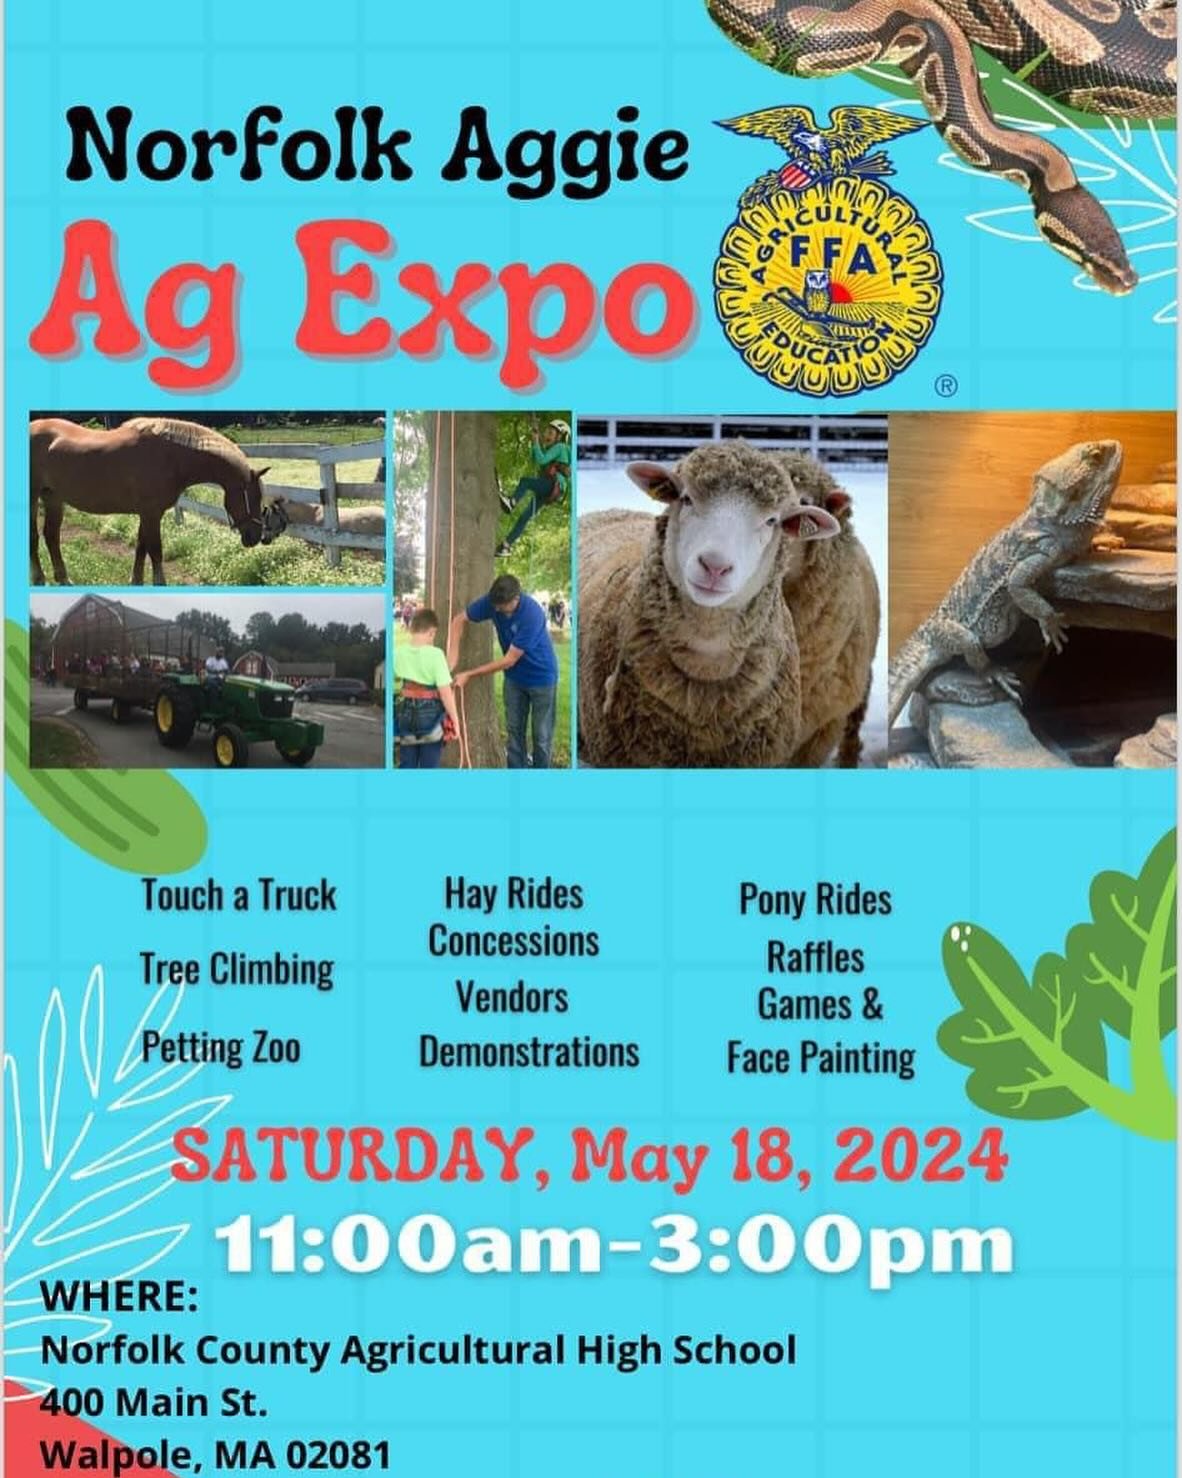 If you plan to come to the Aggie Ag Expo, please stop by the Alumni Association booth and say Hi. We will have selected merch and yearbooks for sale and a raffle!